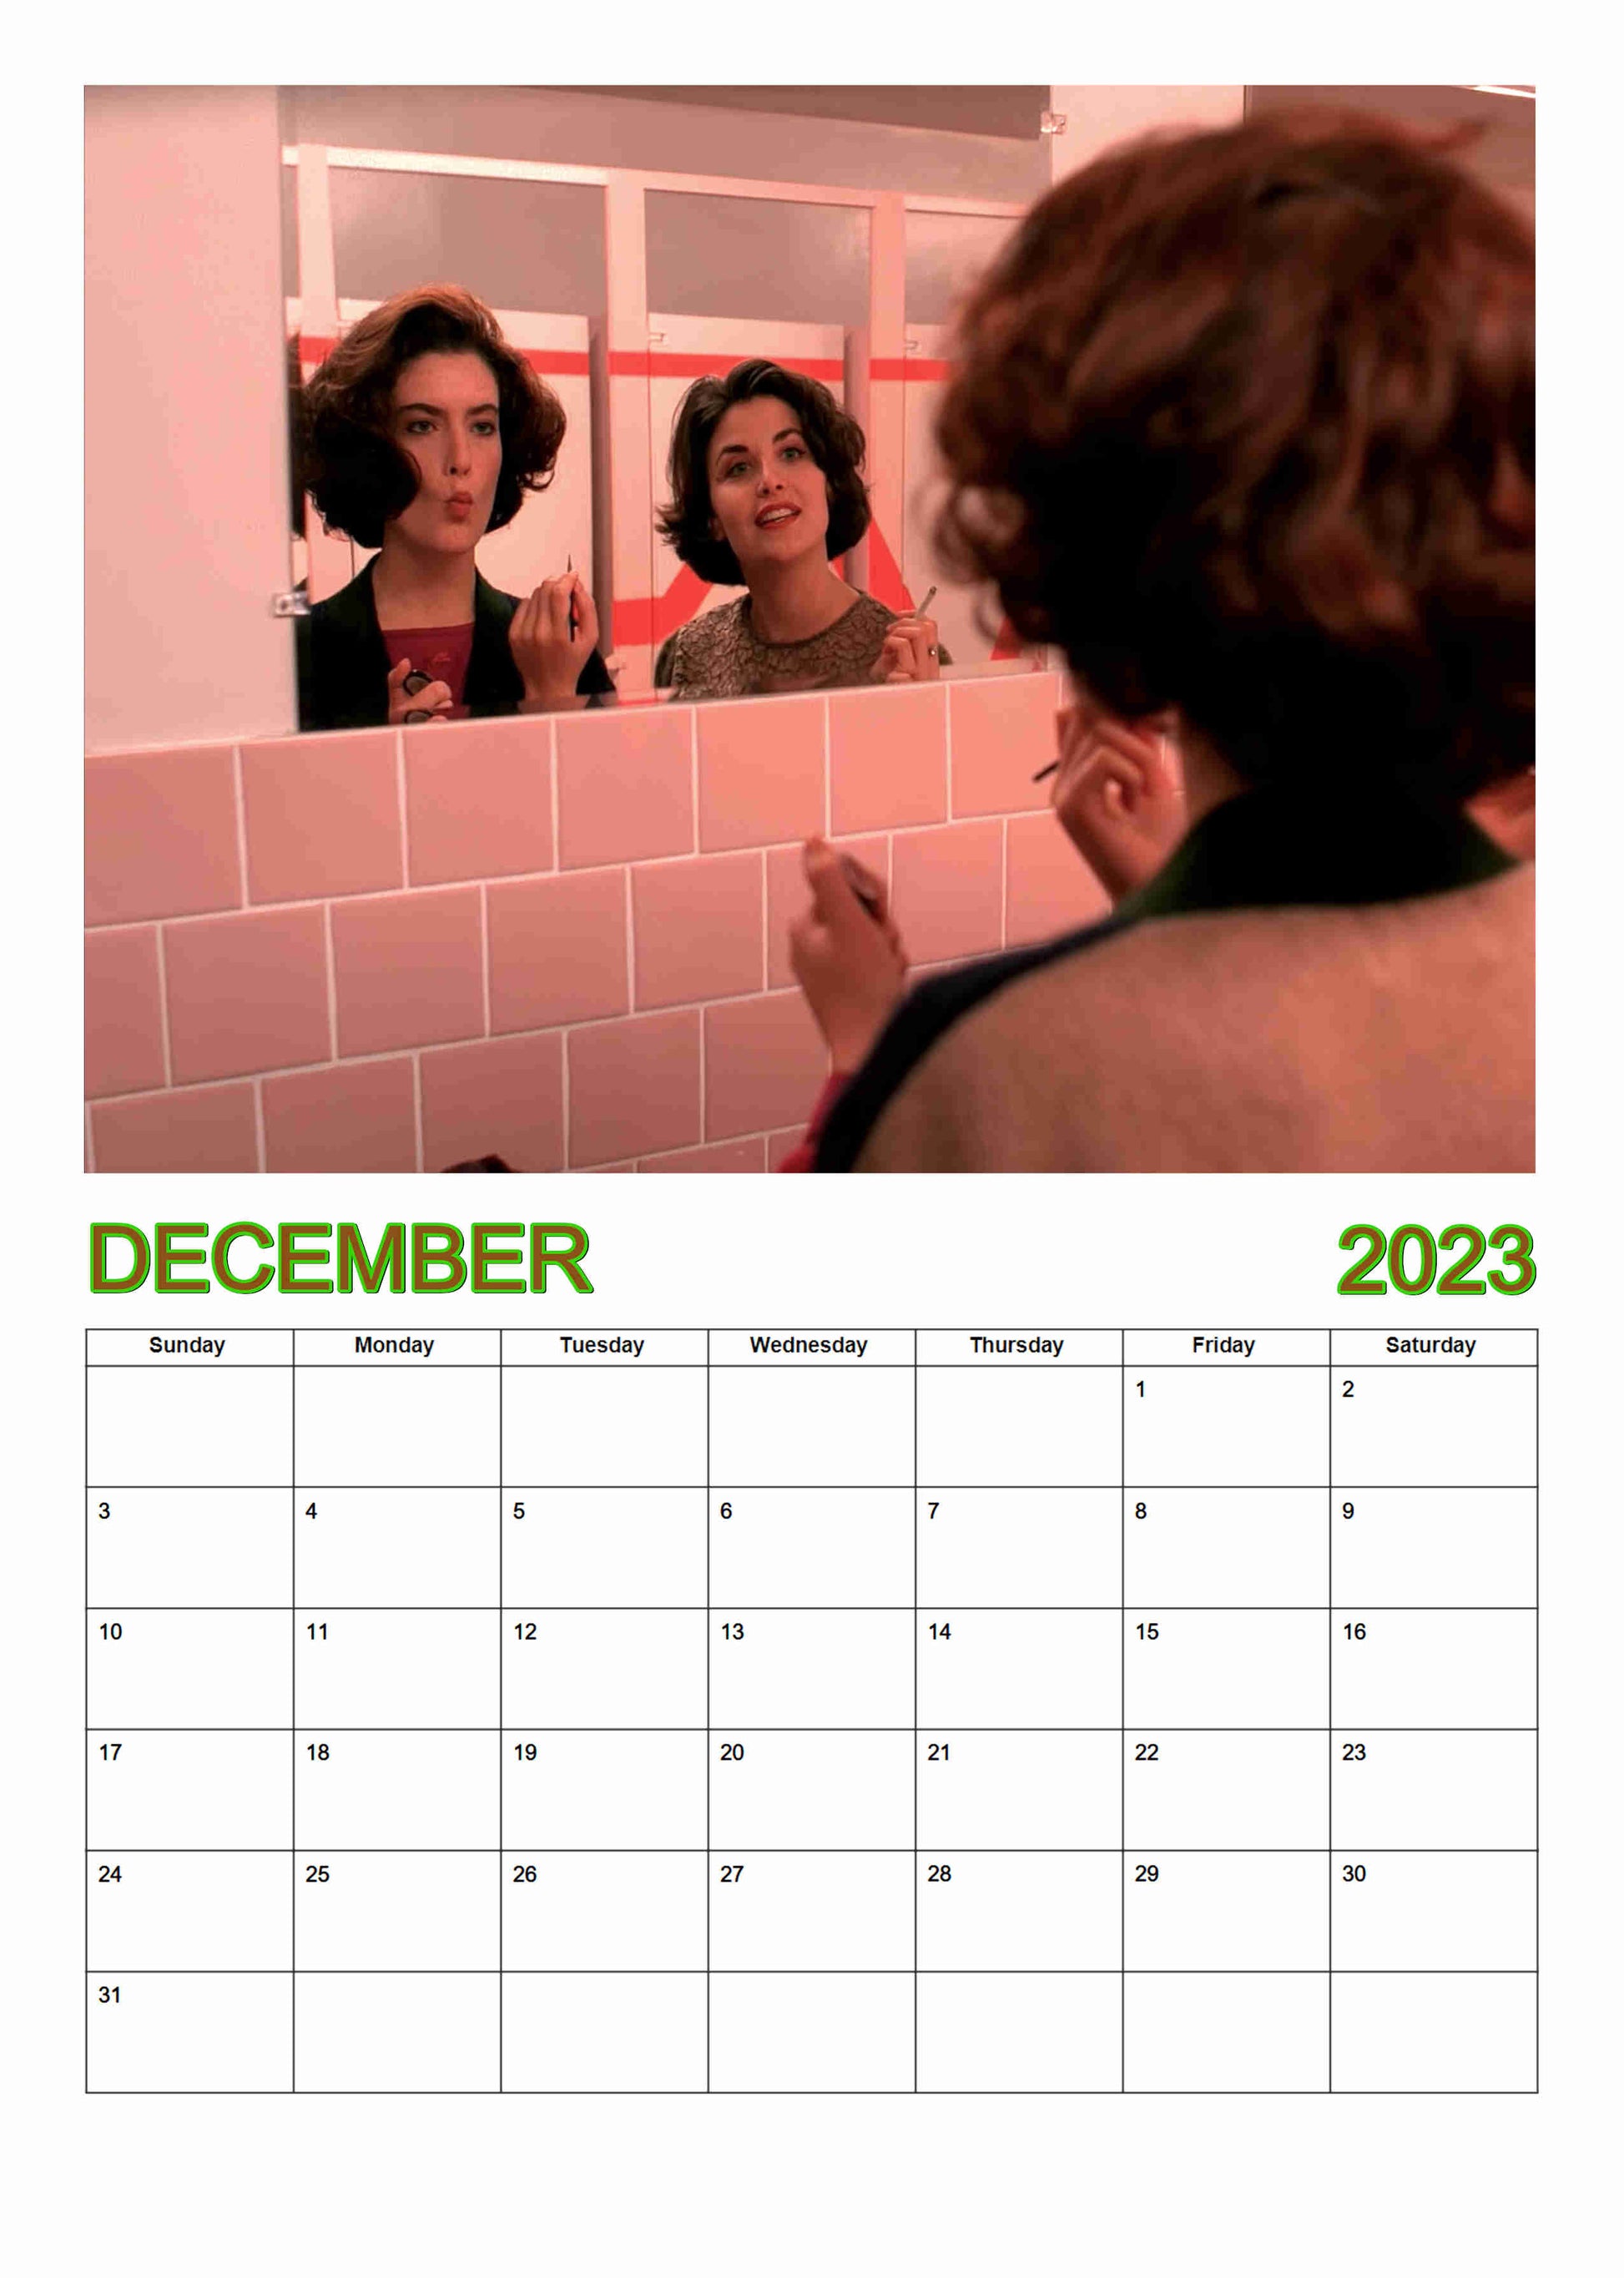 Preview of the month of December featuring Donna and Audrey